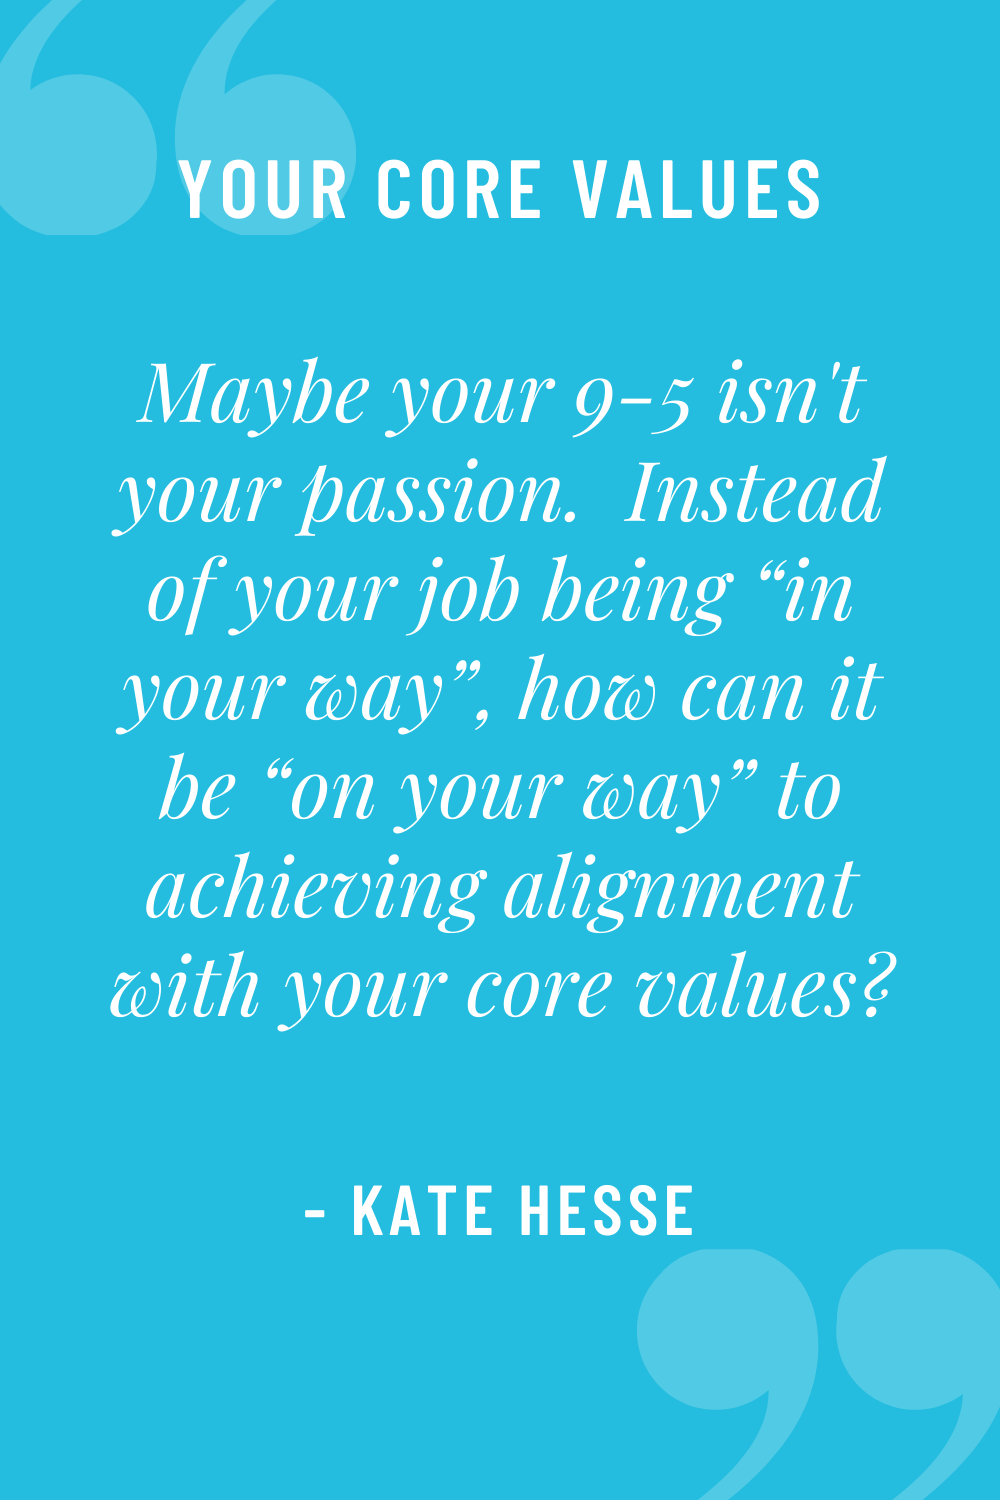 Maybe your 9-5 isn't your passion. Instead of your job being "in your way", how can it be "on your way" to achieving alignment with your core values?